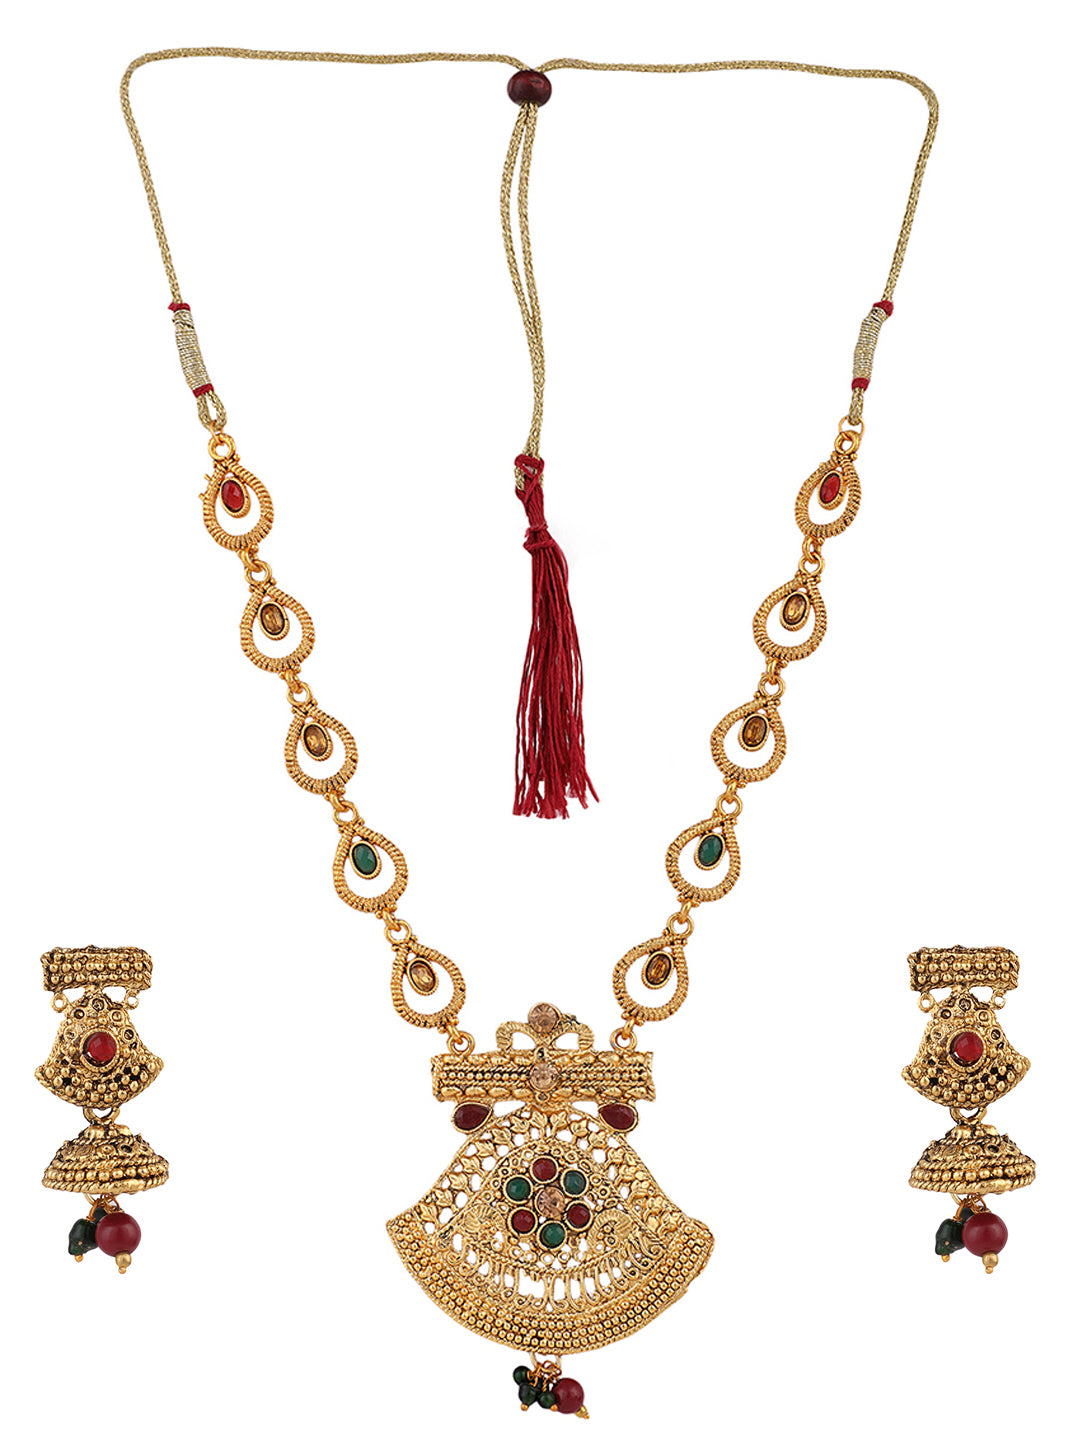 Women's Gold Tone Traditional Stone And Pearl Brass Necklace With Earring - Anikas Creation